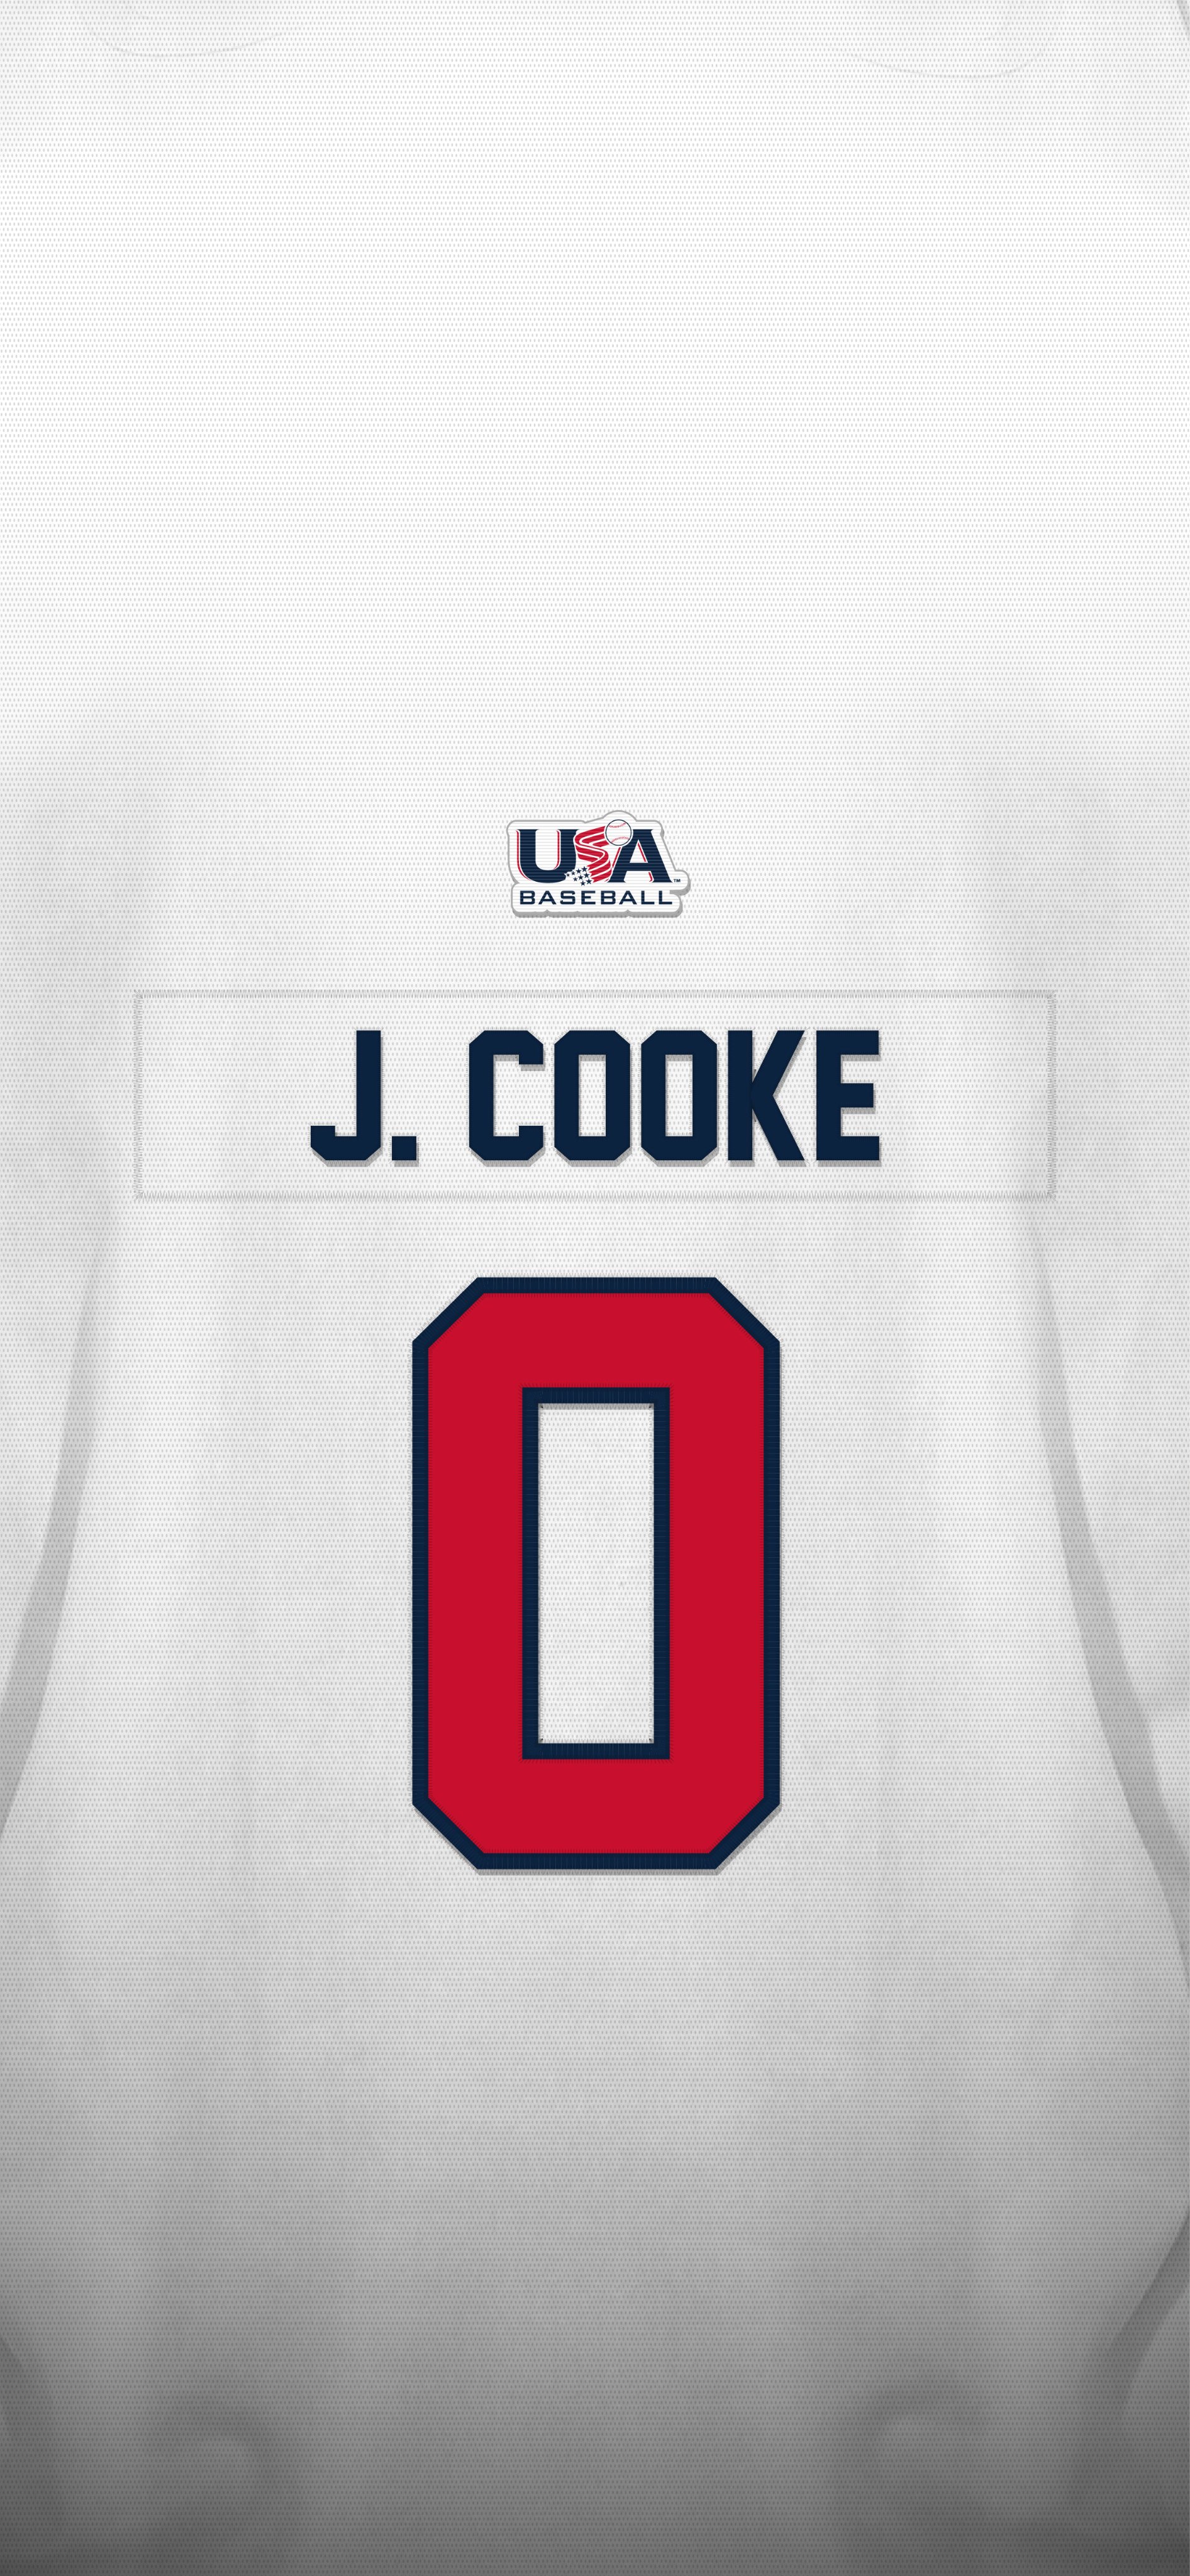 USA Baseball your very own #TeamUSA jersey phone wallpaper? Here's your chance! Tell us the name and number you'd like on either navy or white and we'll create as